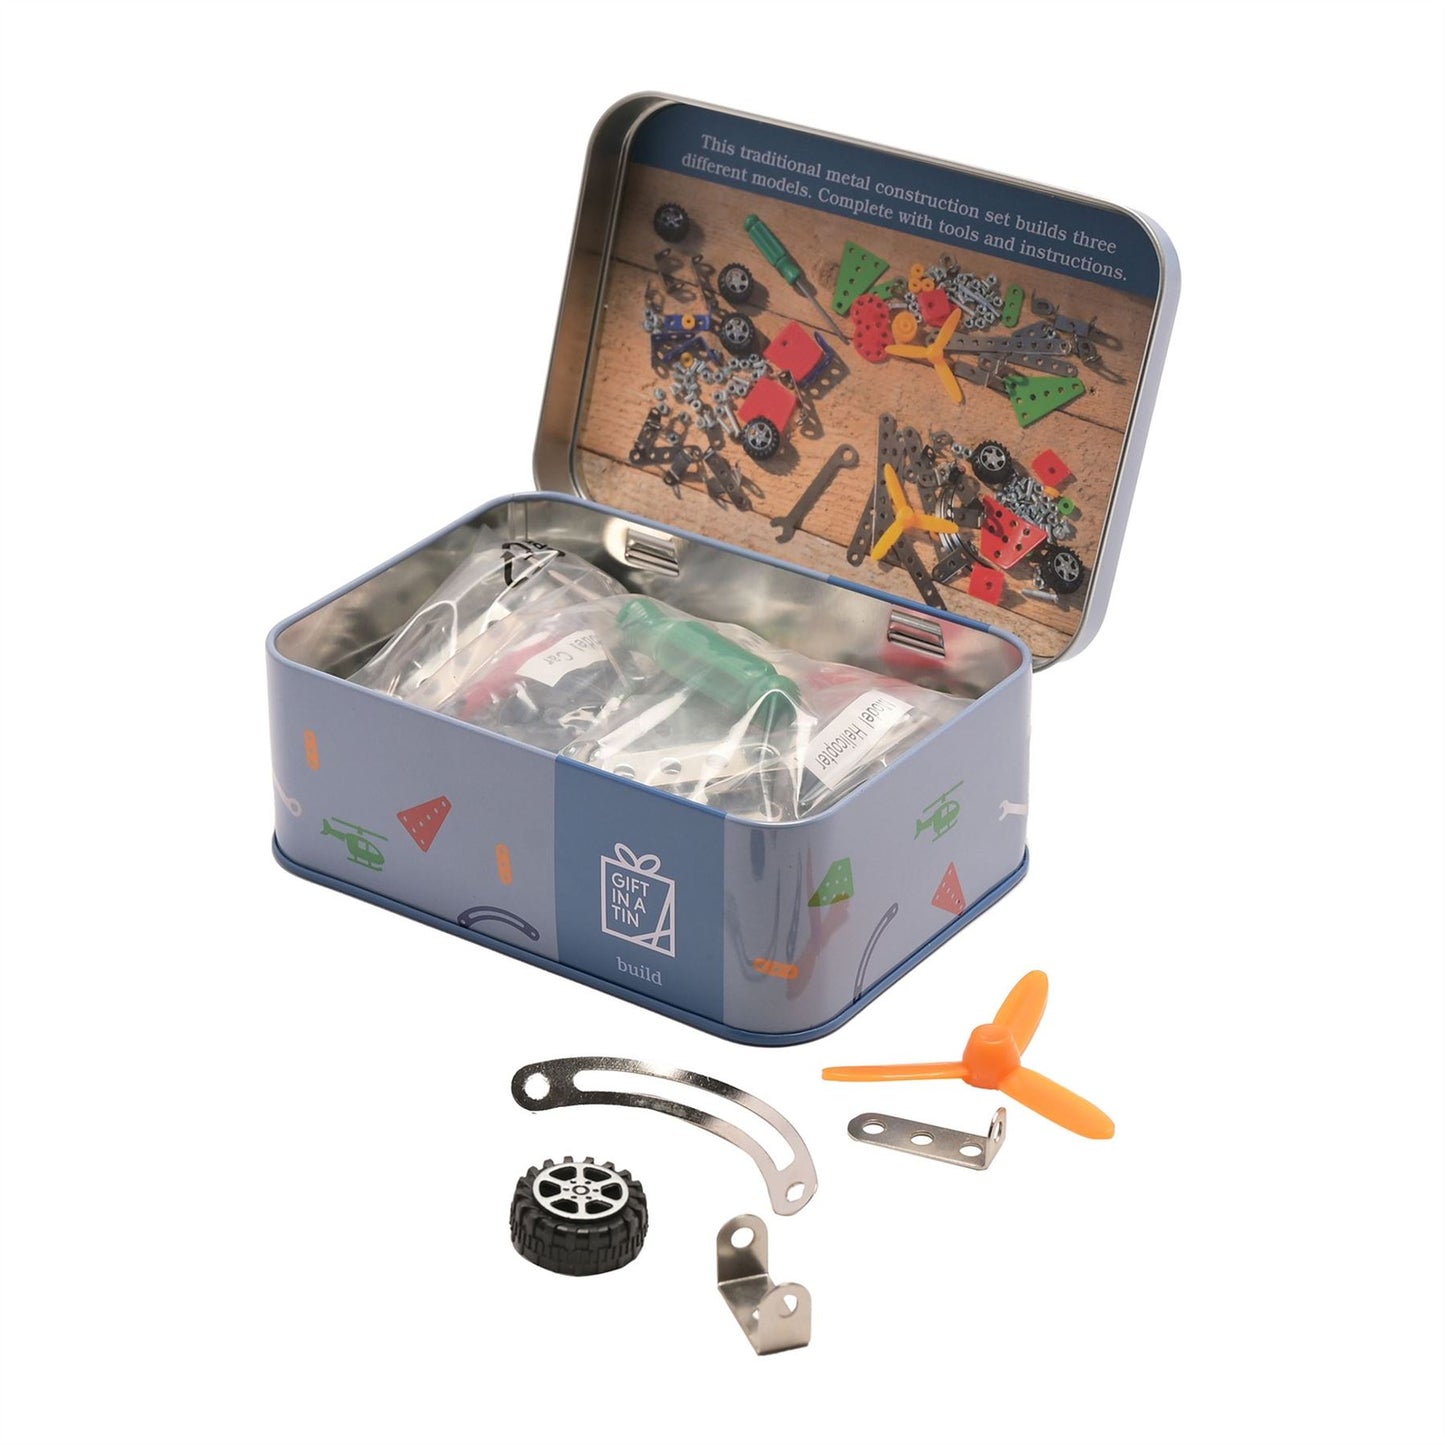 Apples To Pears Gift In A Tin Mini Mechanic Construction Set